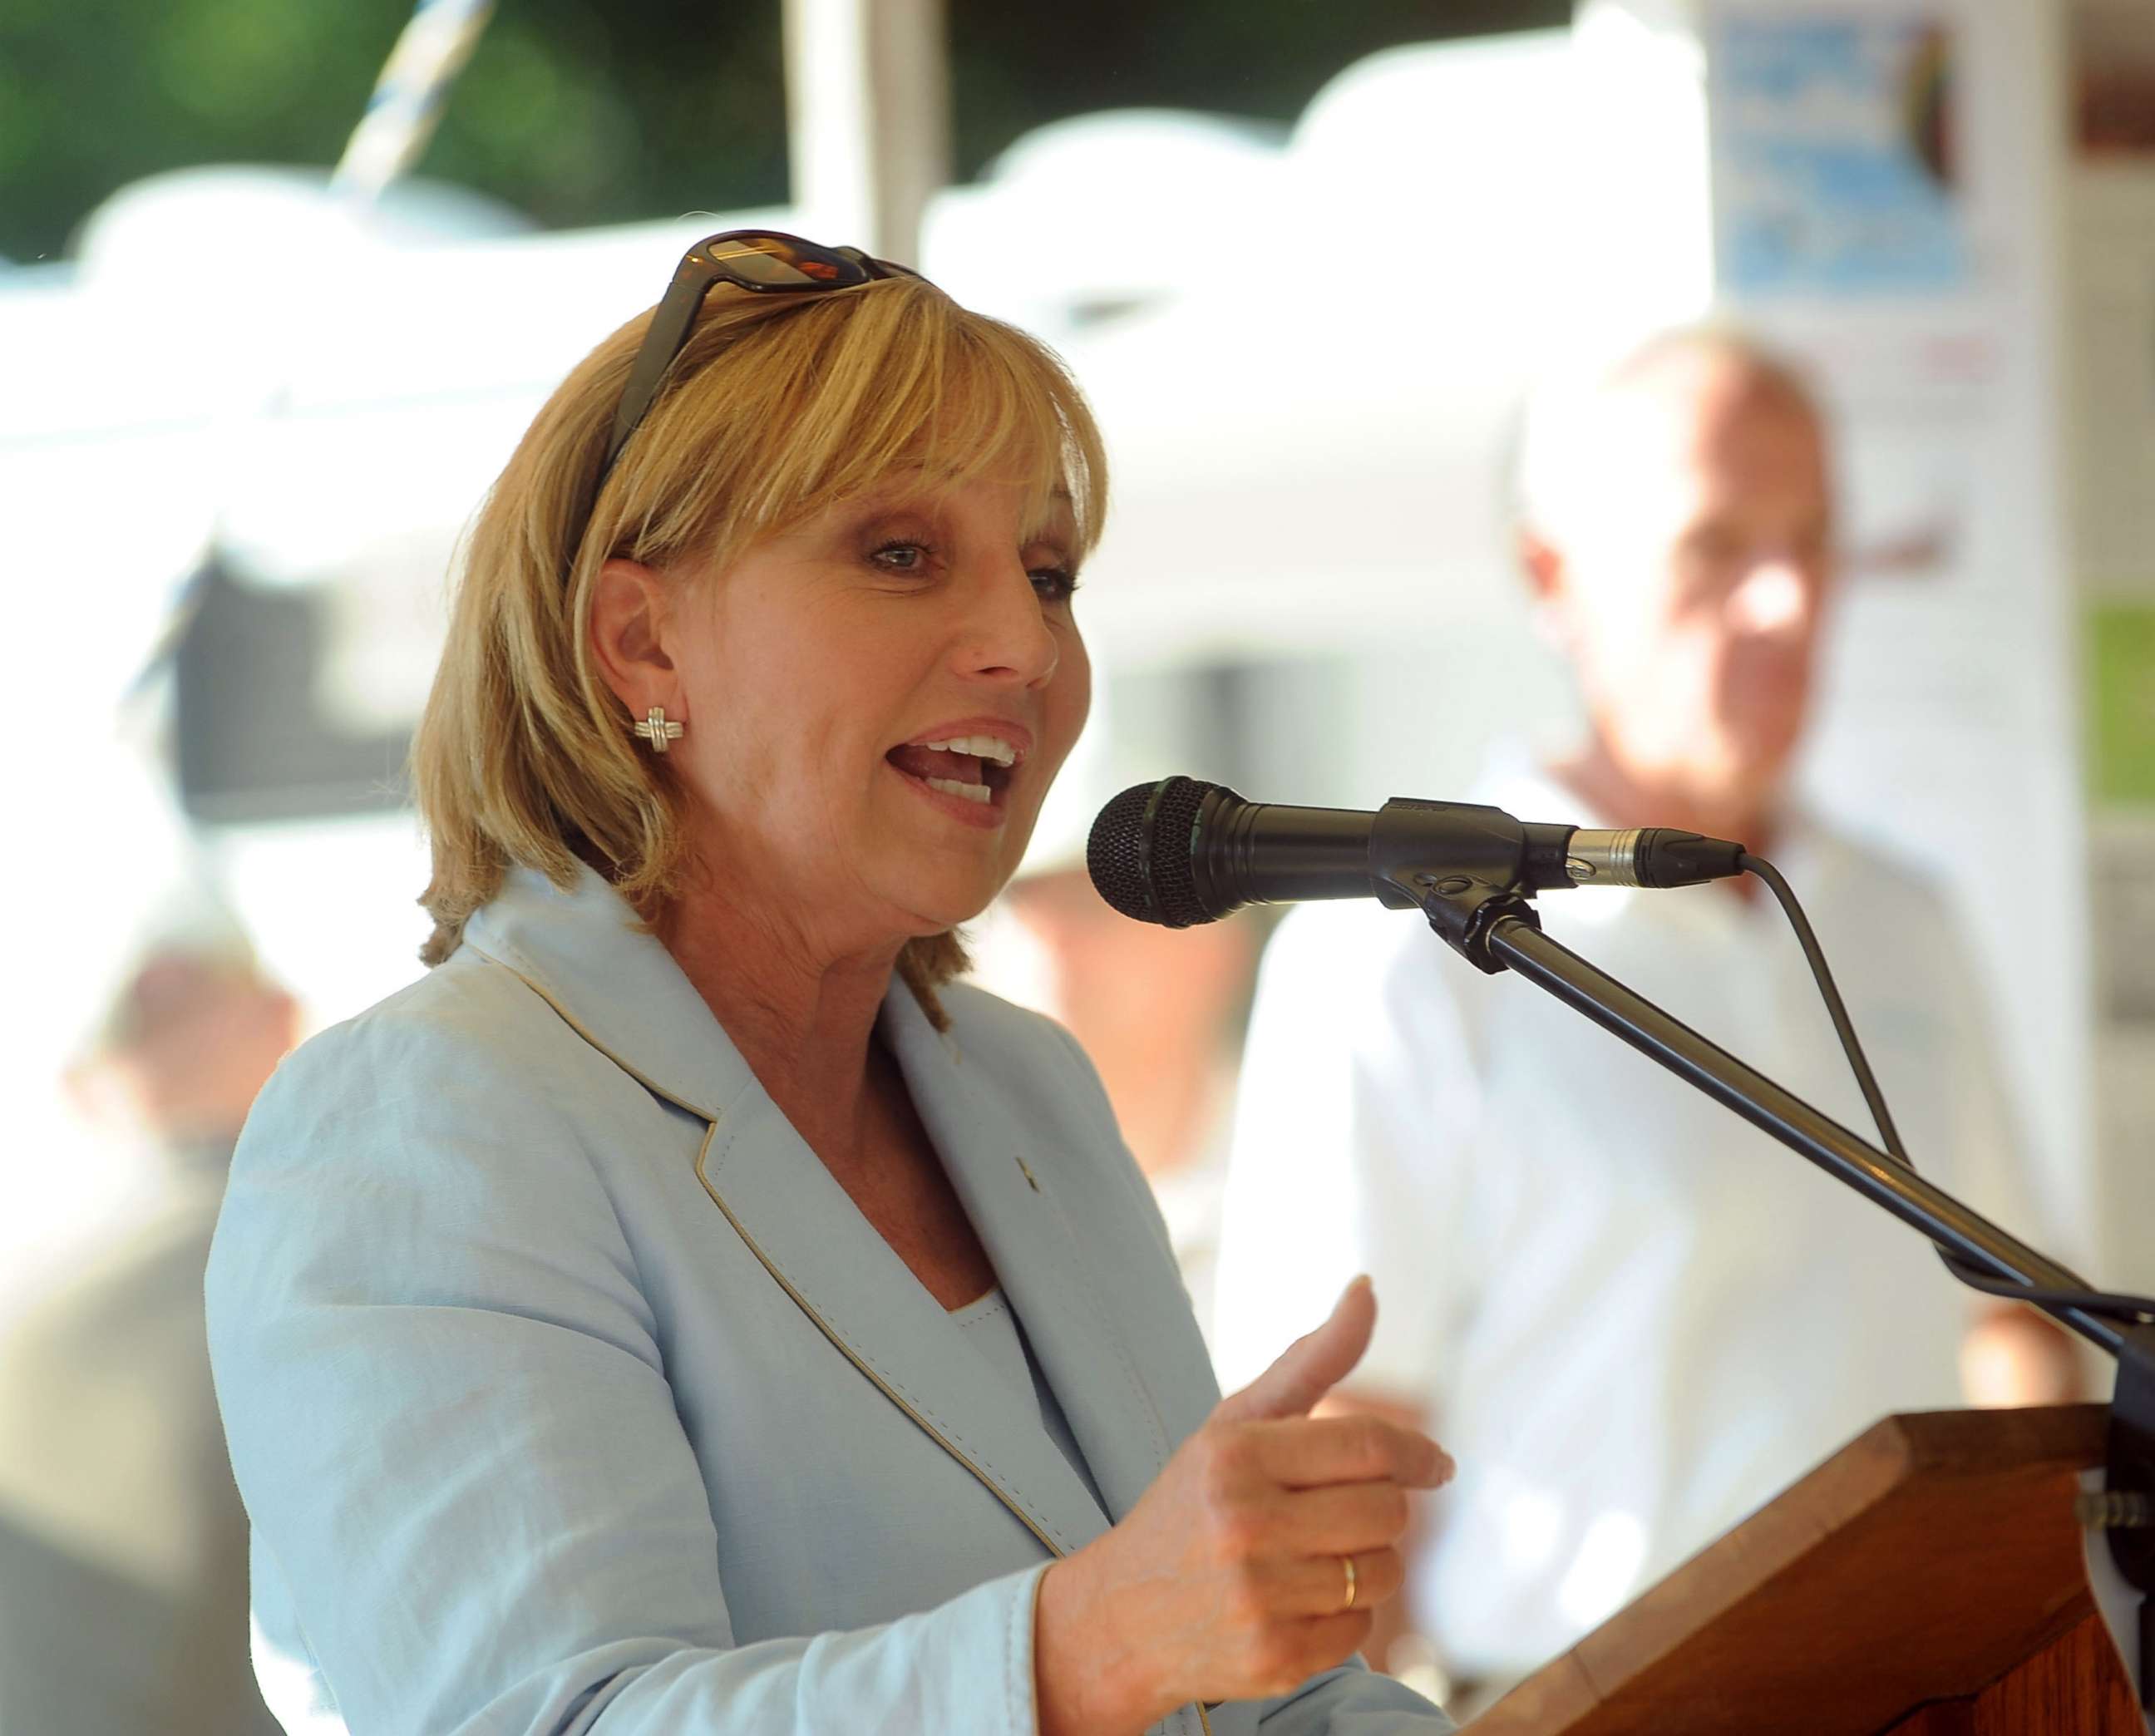 PHOTO: New Jersey Lt. Governor Kim Guadagno speaks at an event at Solberg Airport, July 24, 2015 in Readington, N.J.